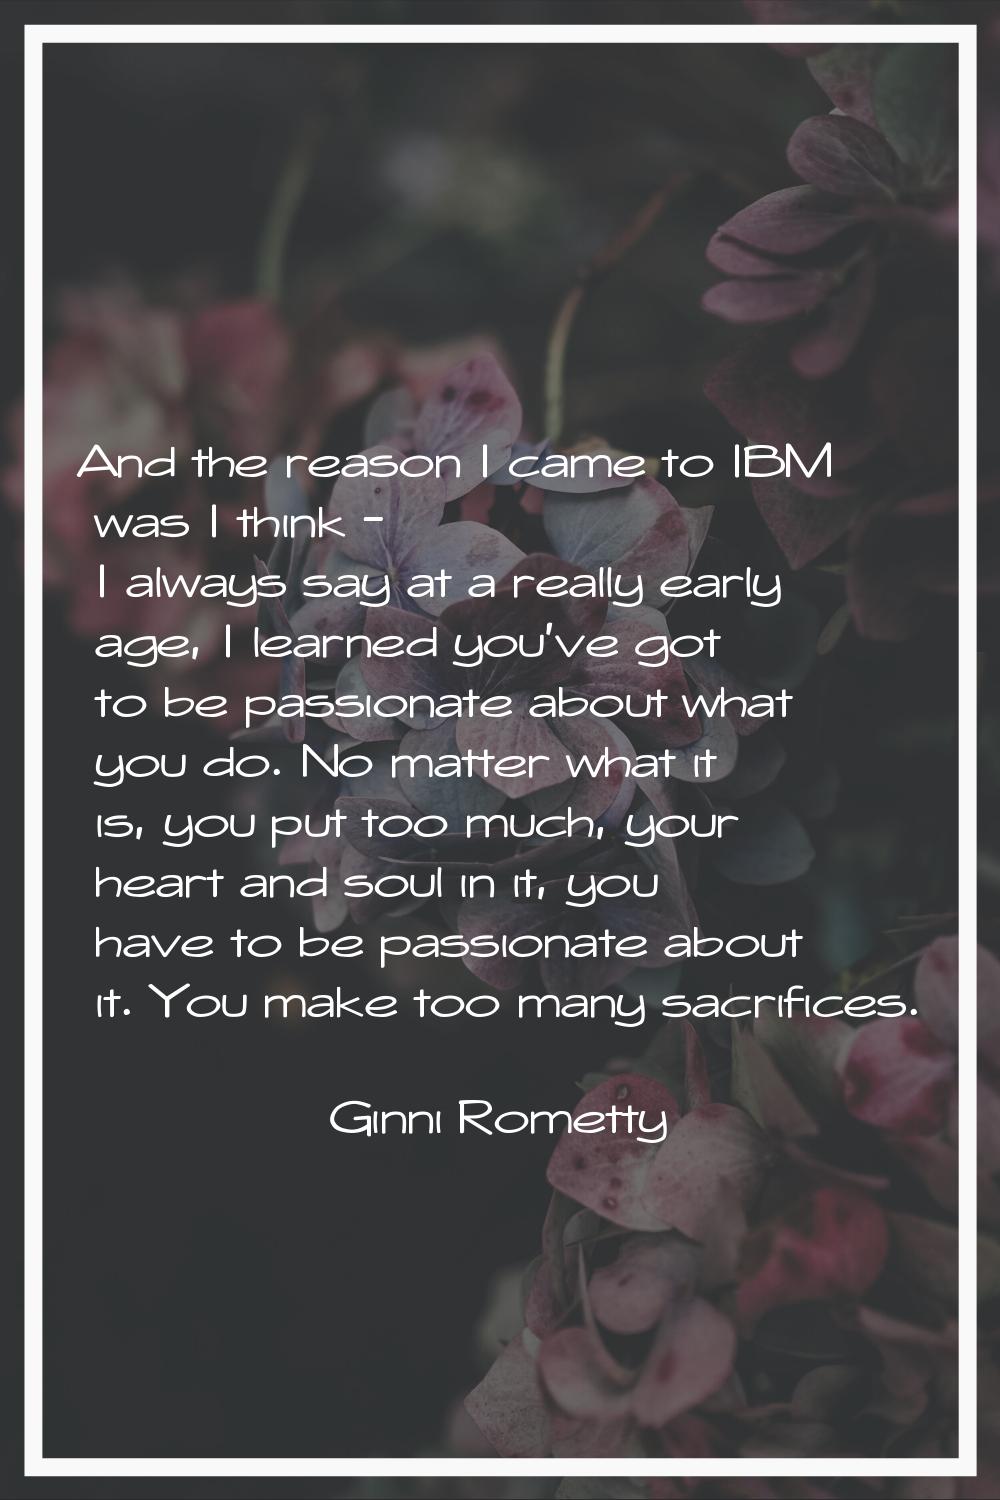 And the reason I came to IBM was I think - I always say at a really early age, I learned you've got